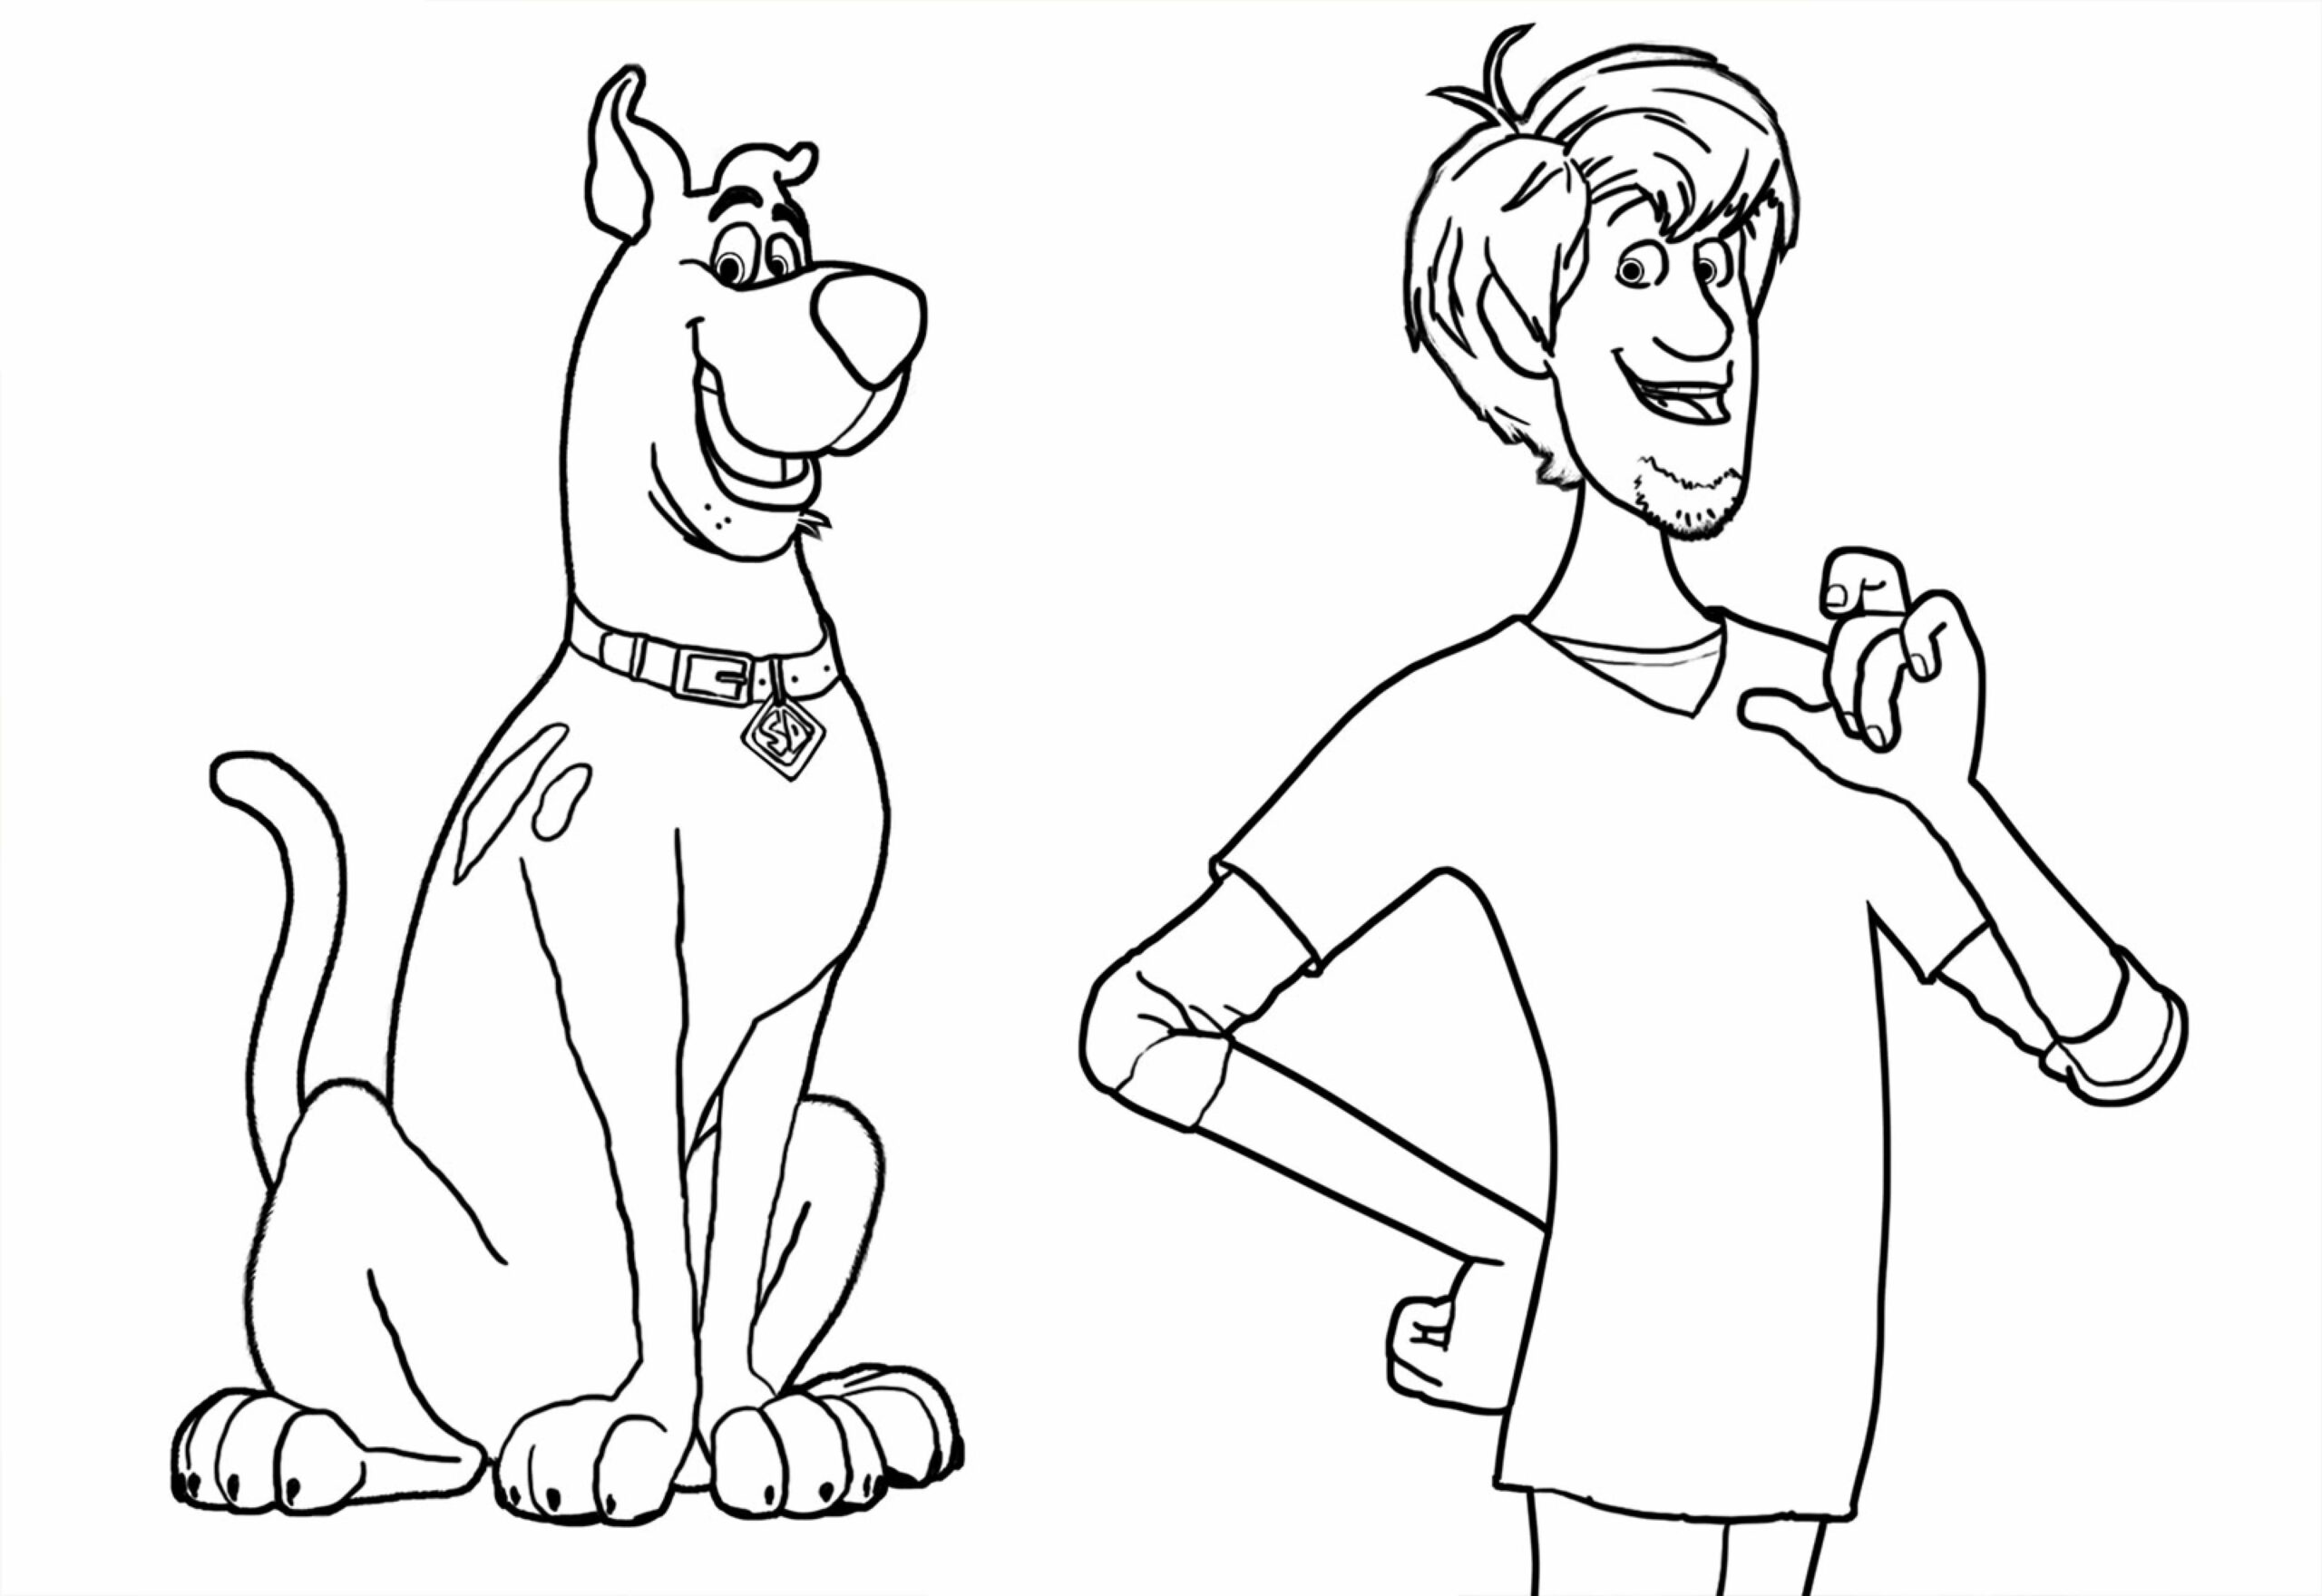 Fun Shaggy And Scooby-Doo coloring page - Download, Print or Color ...